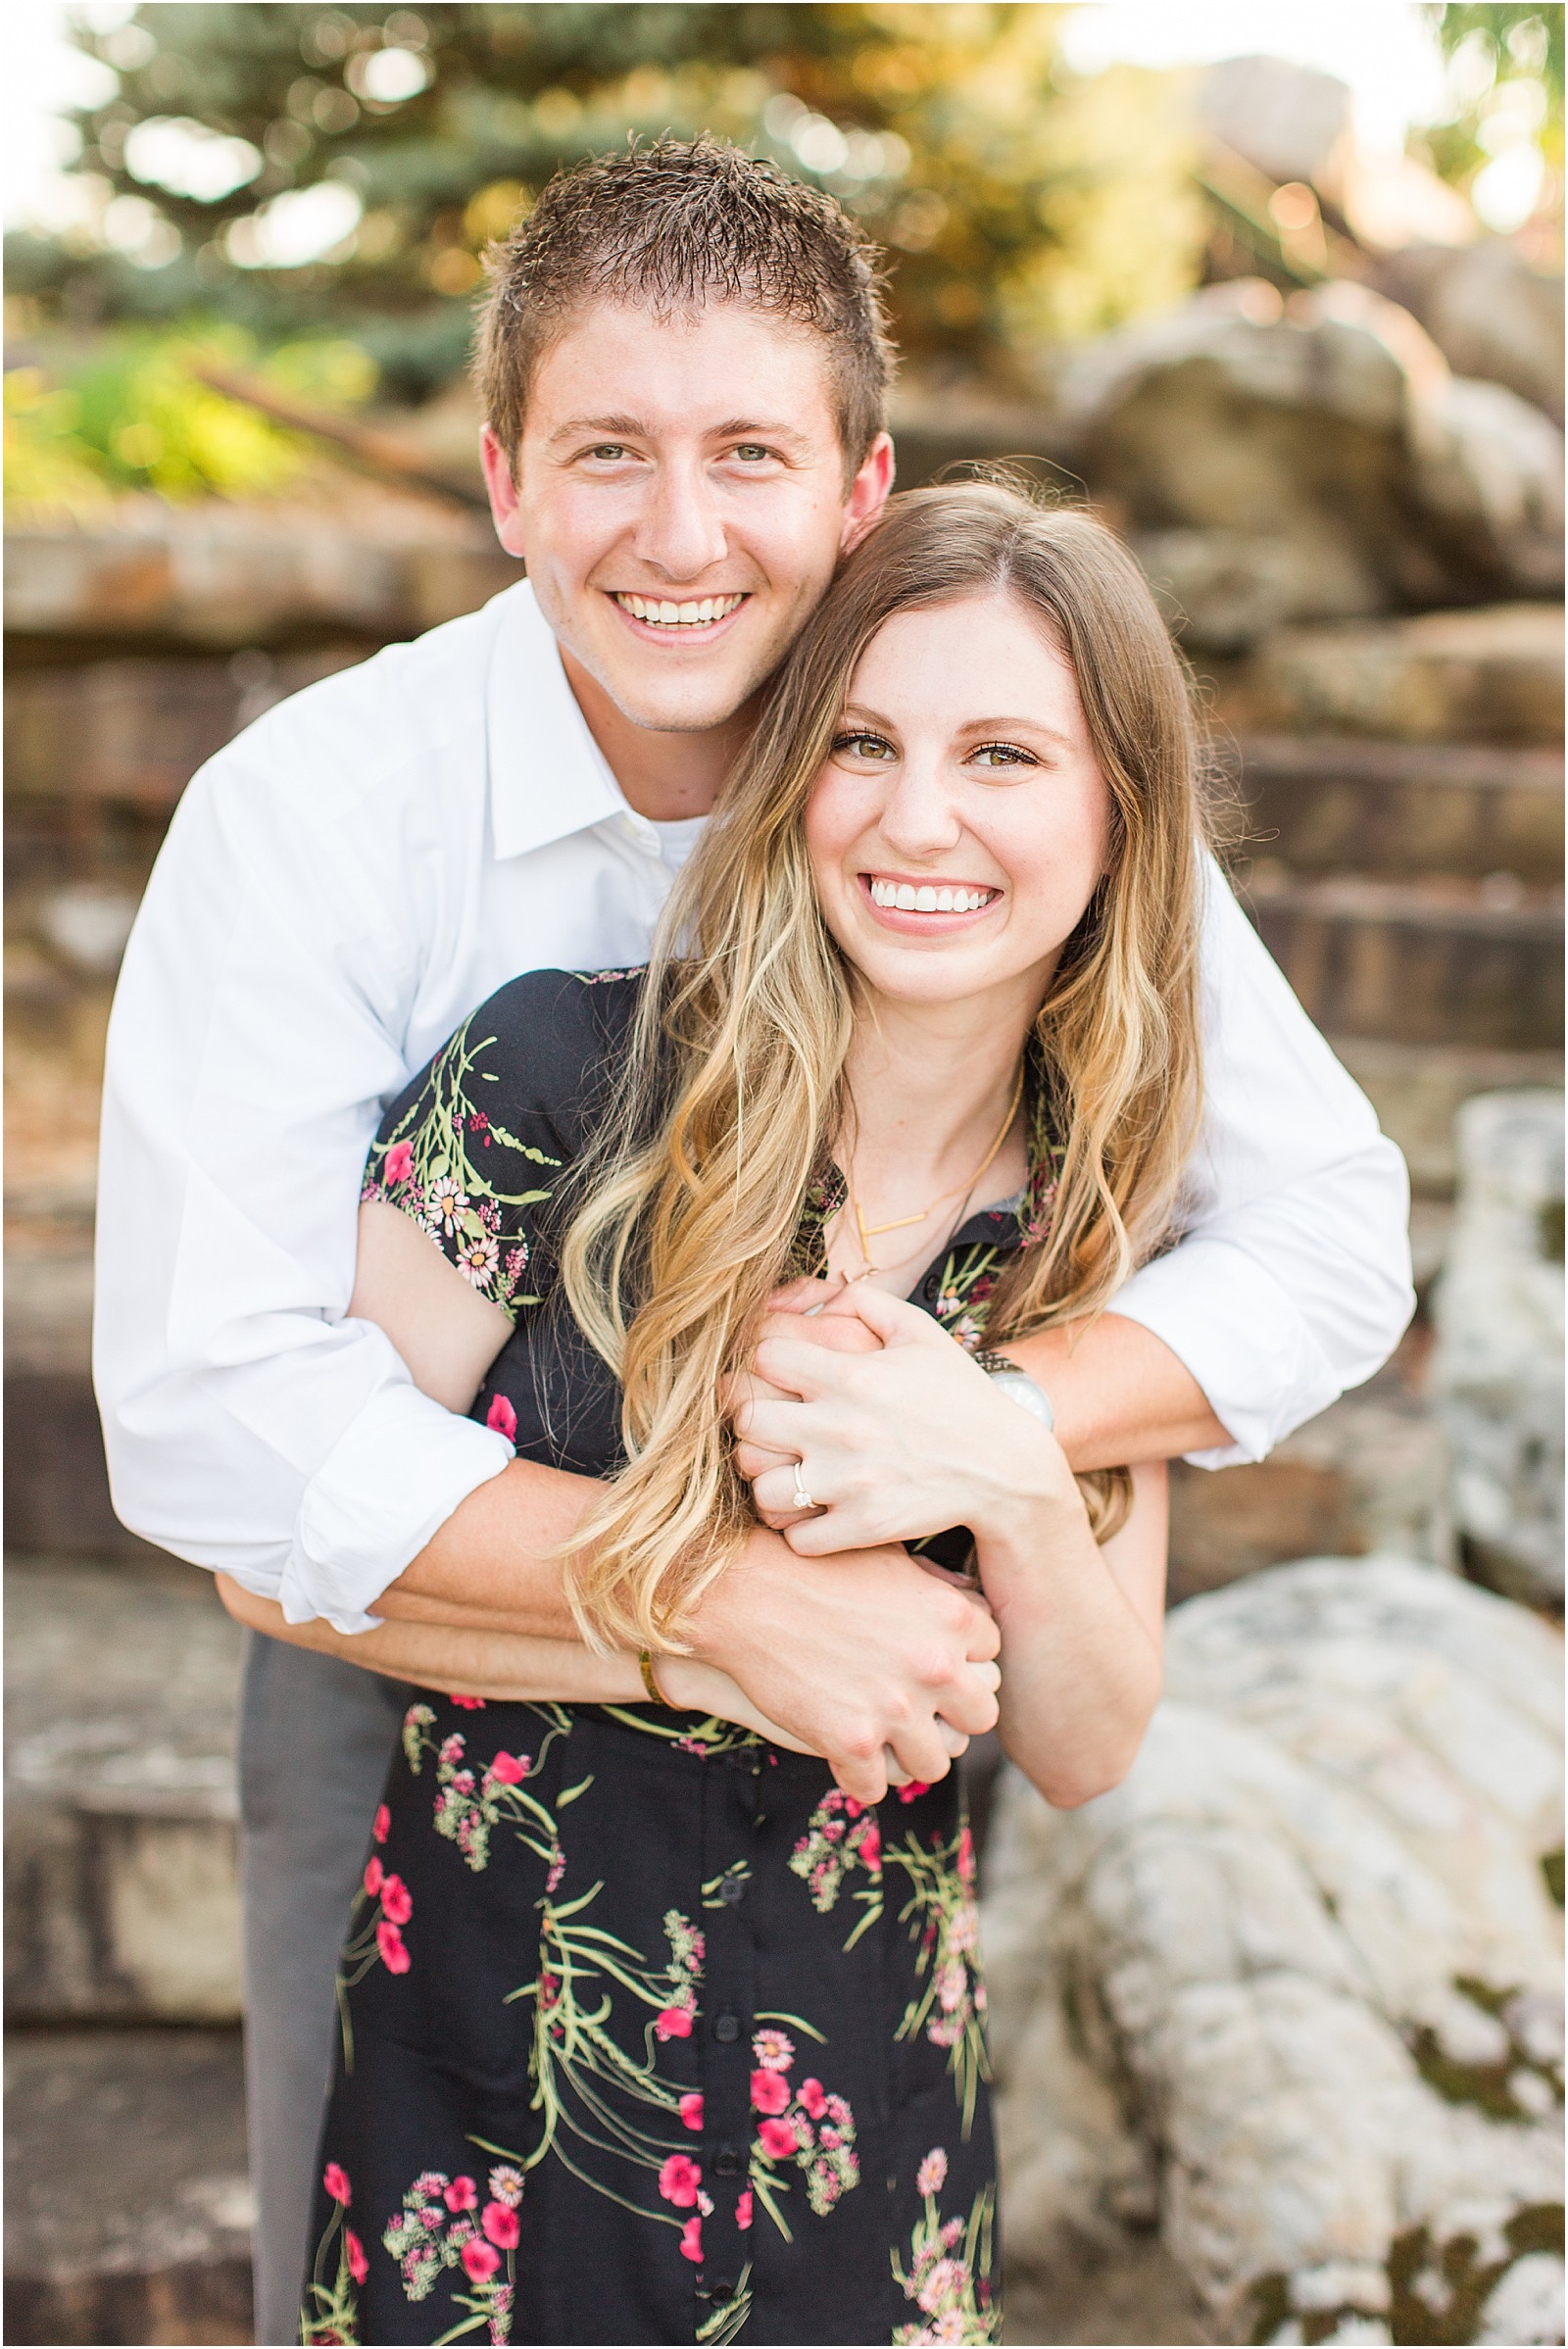 A Jasper Indiana Engagement Session | Tori and Kyle | Bret and Brandie Photography020.jpg